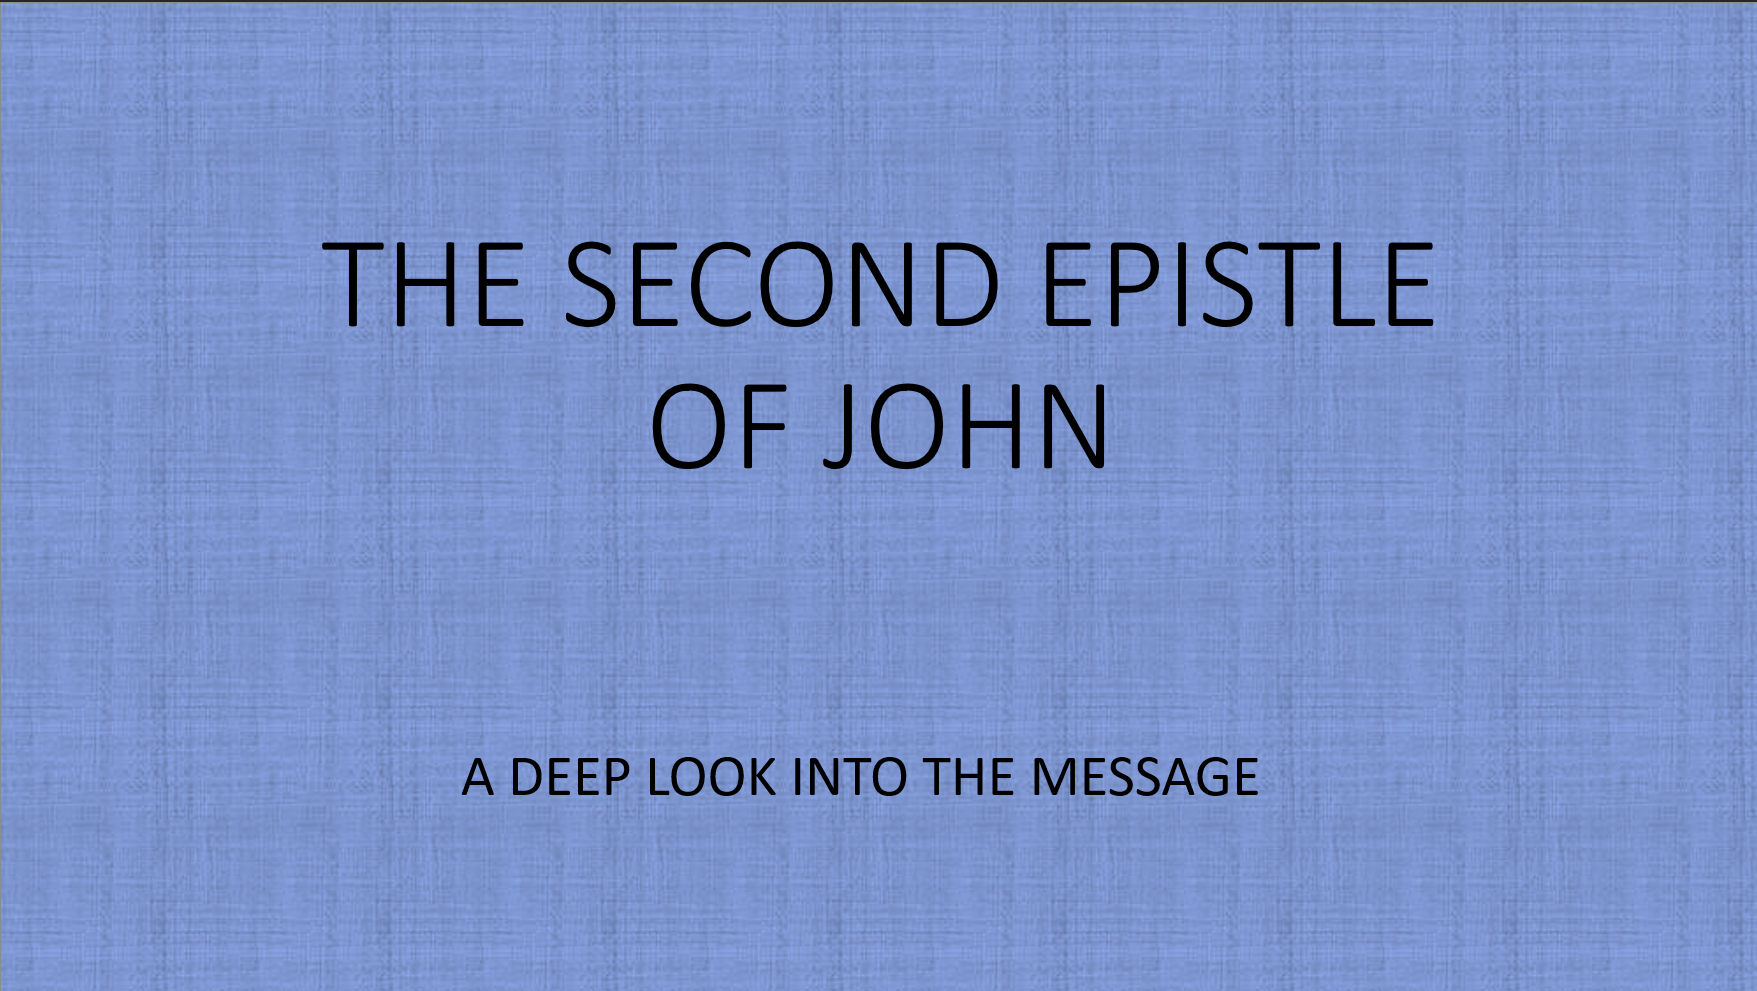 The Second Epistle of John - A Deep Look into the Message - Chase Byers